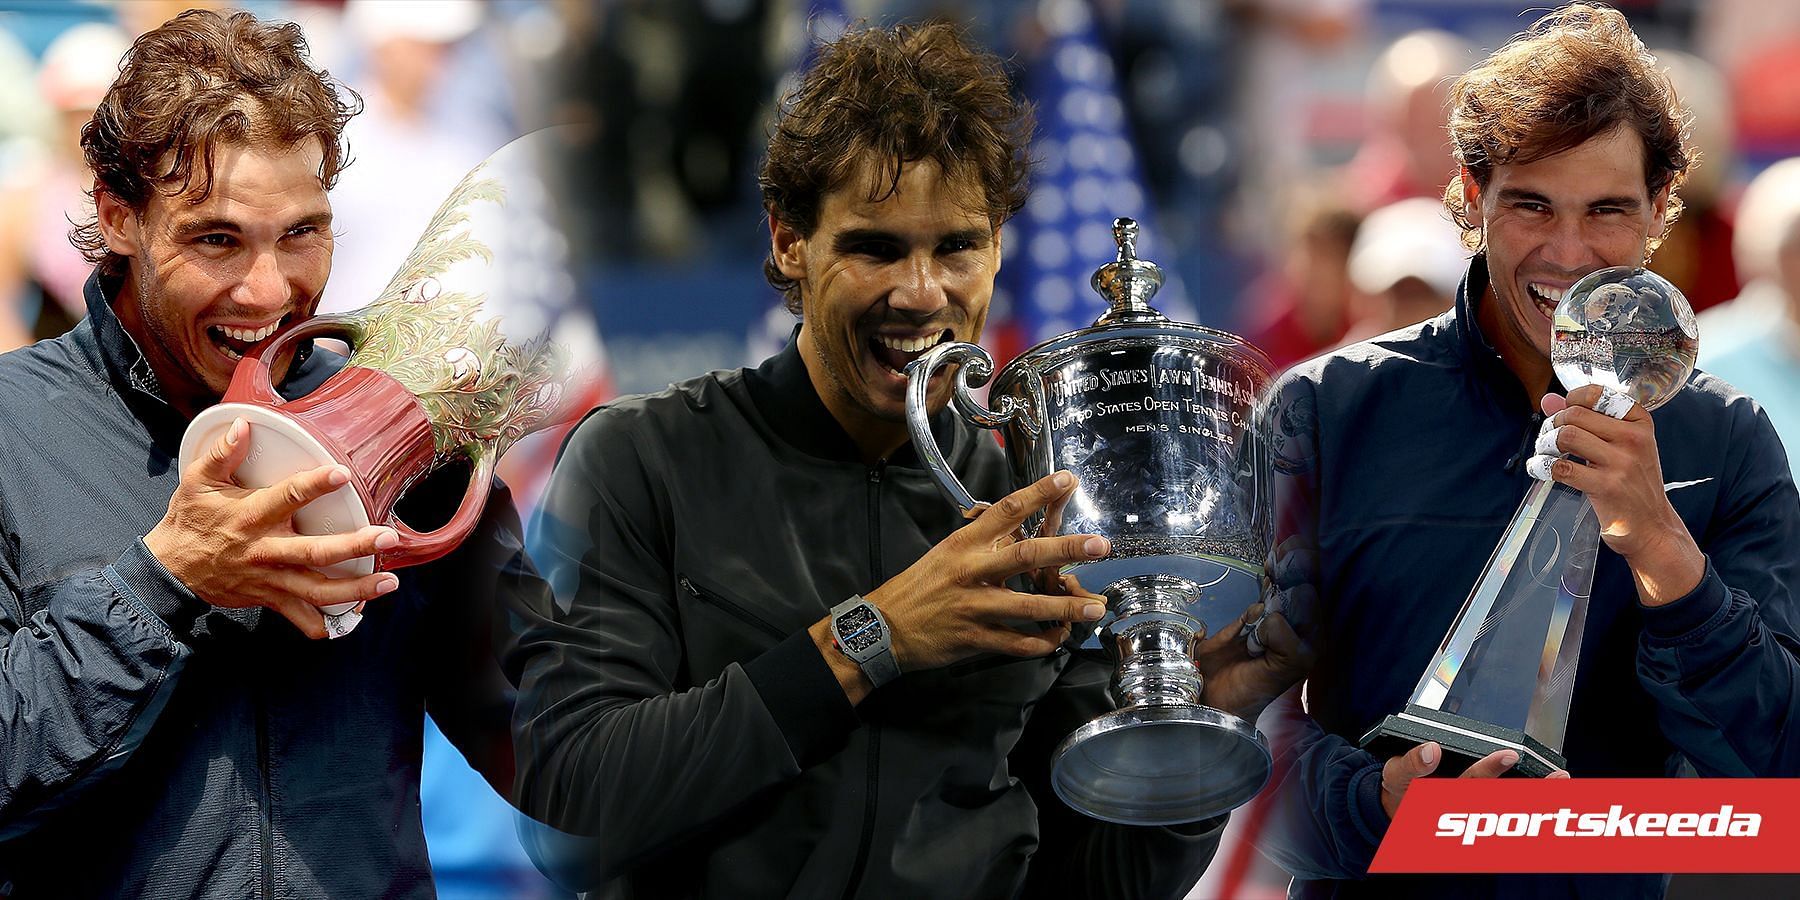 Rafael Nadal is one of the three players to complete the Summer Slam